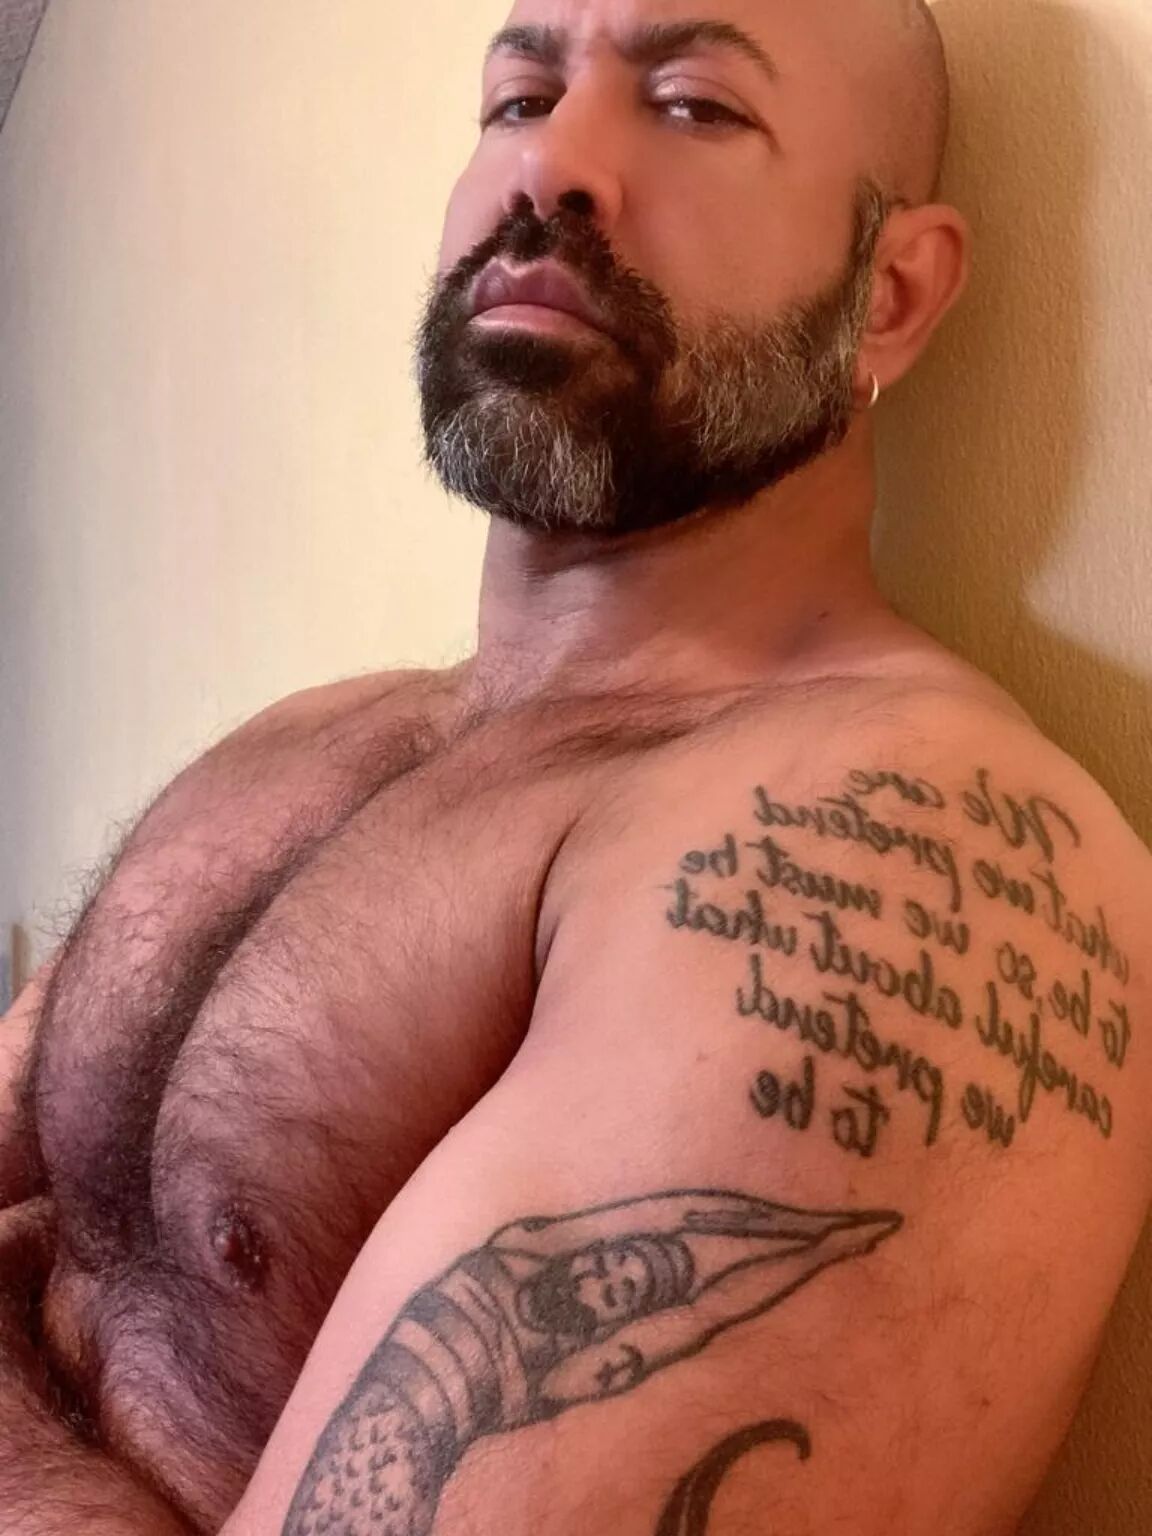 A sultry bearded bear with a tattooed shoulder smolders at the camera